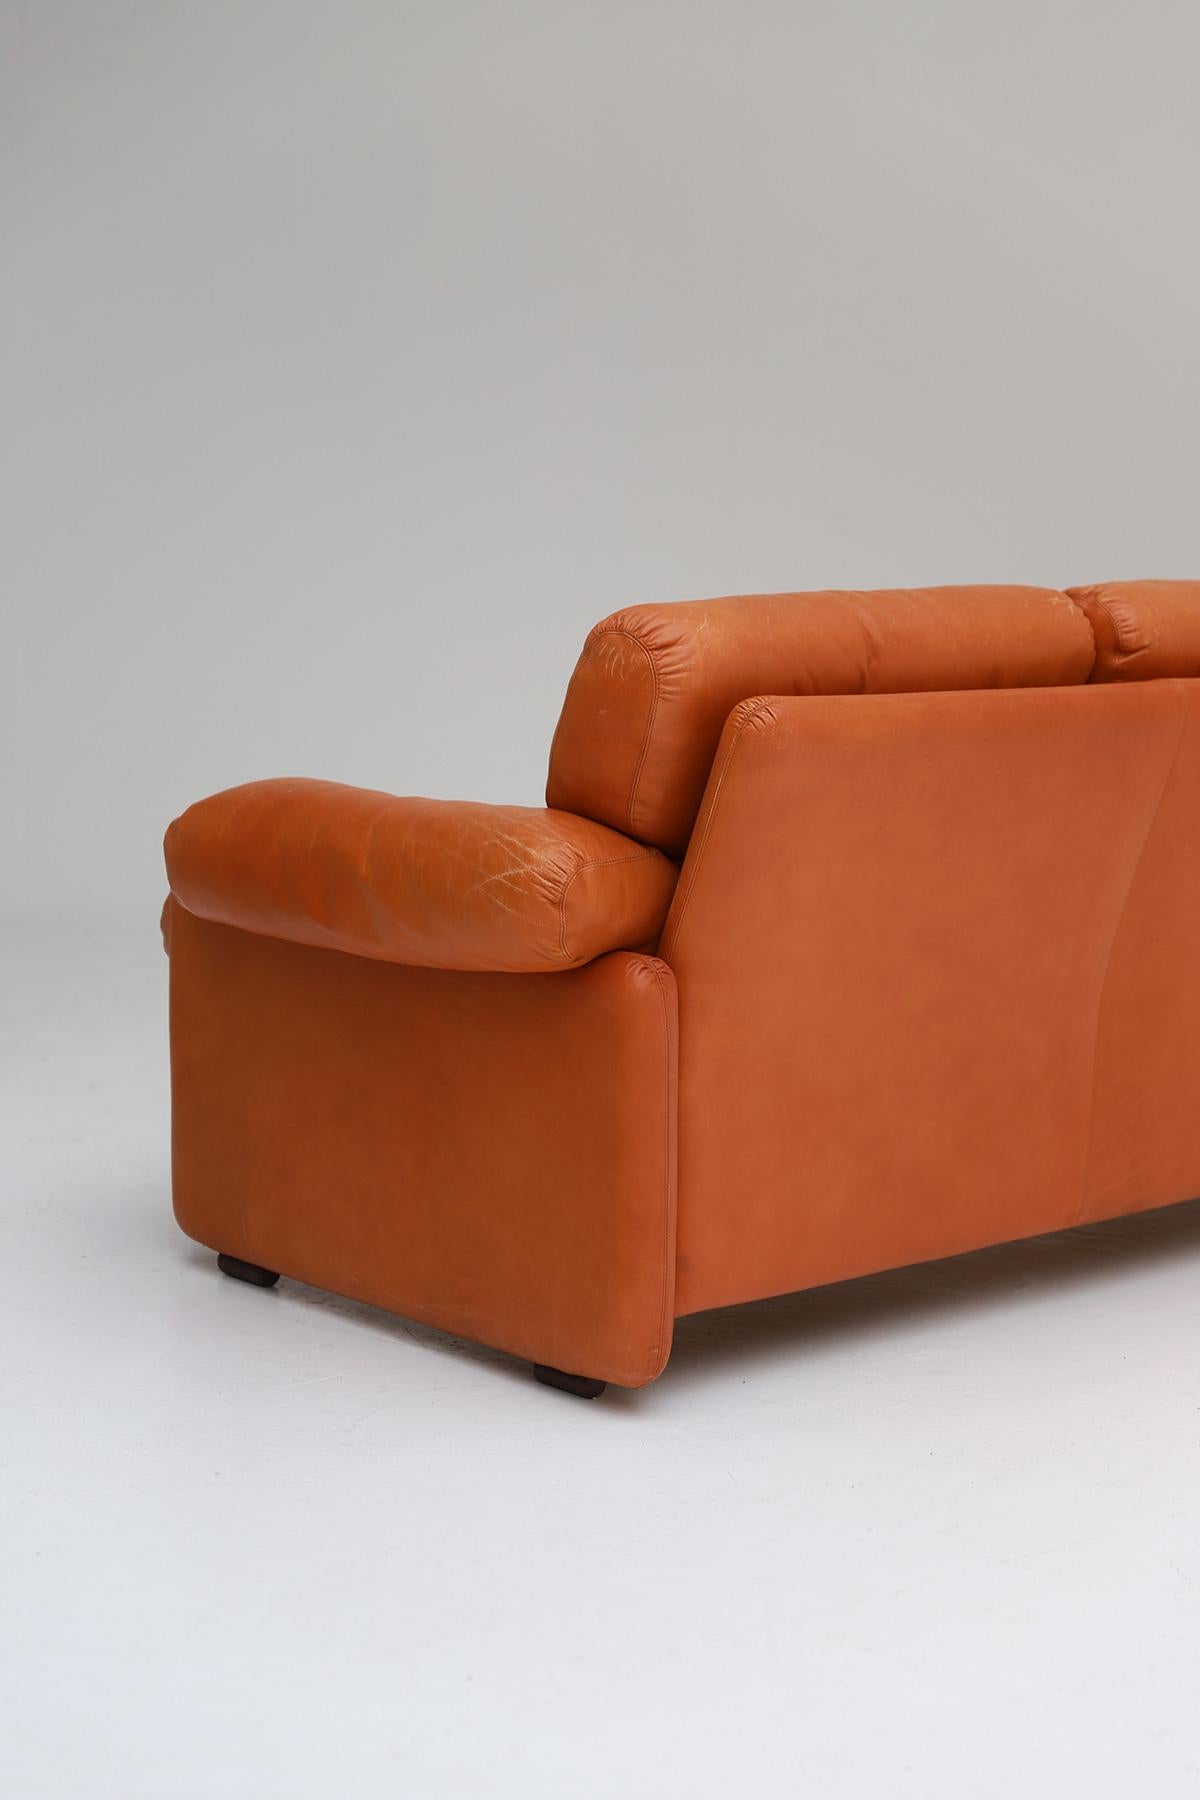 Mid-Century Modern Mid-Century Cognac Leather 4 Seat Sofa by Tobia Scarpa for B&B Italia For Sale